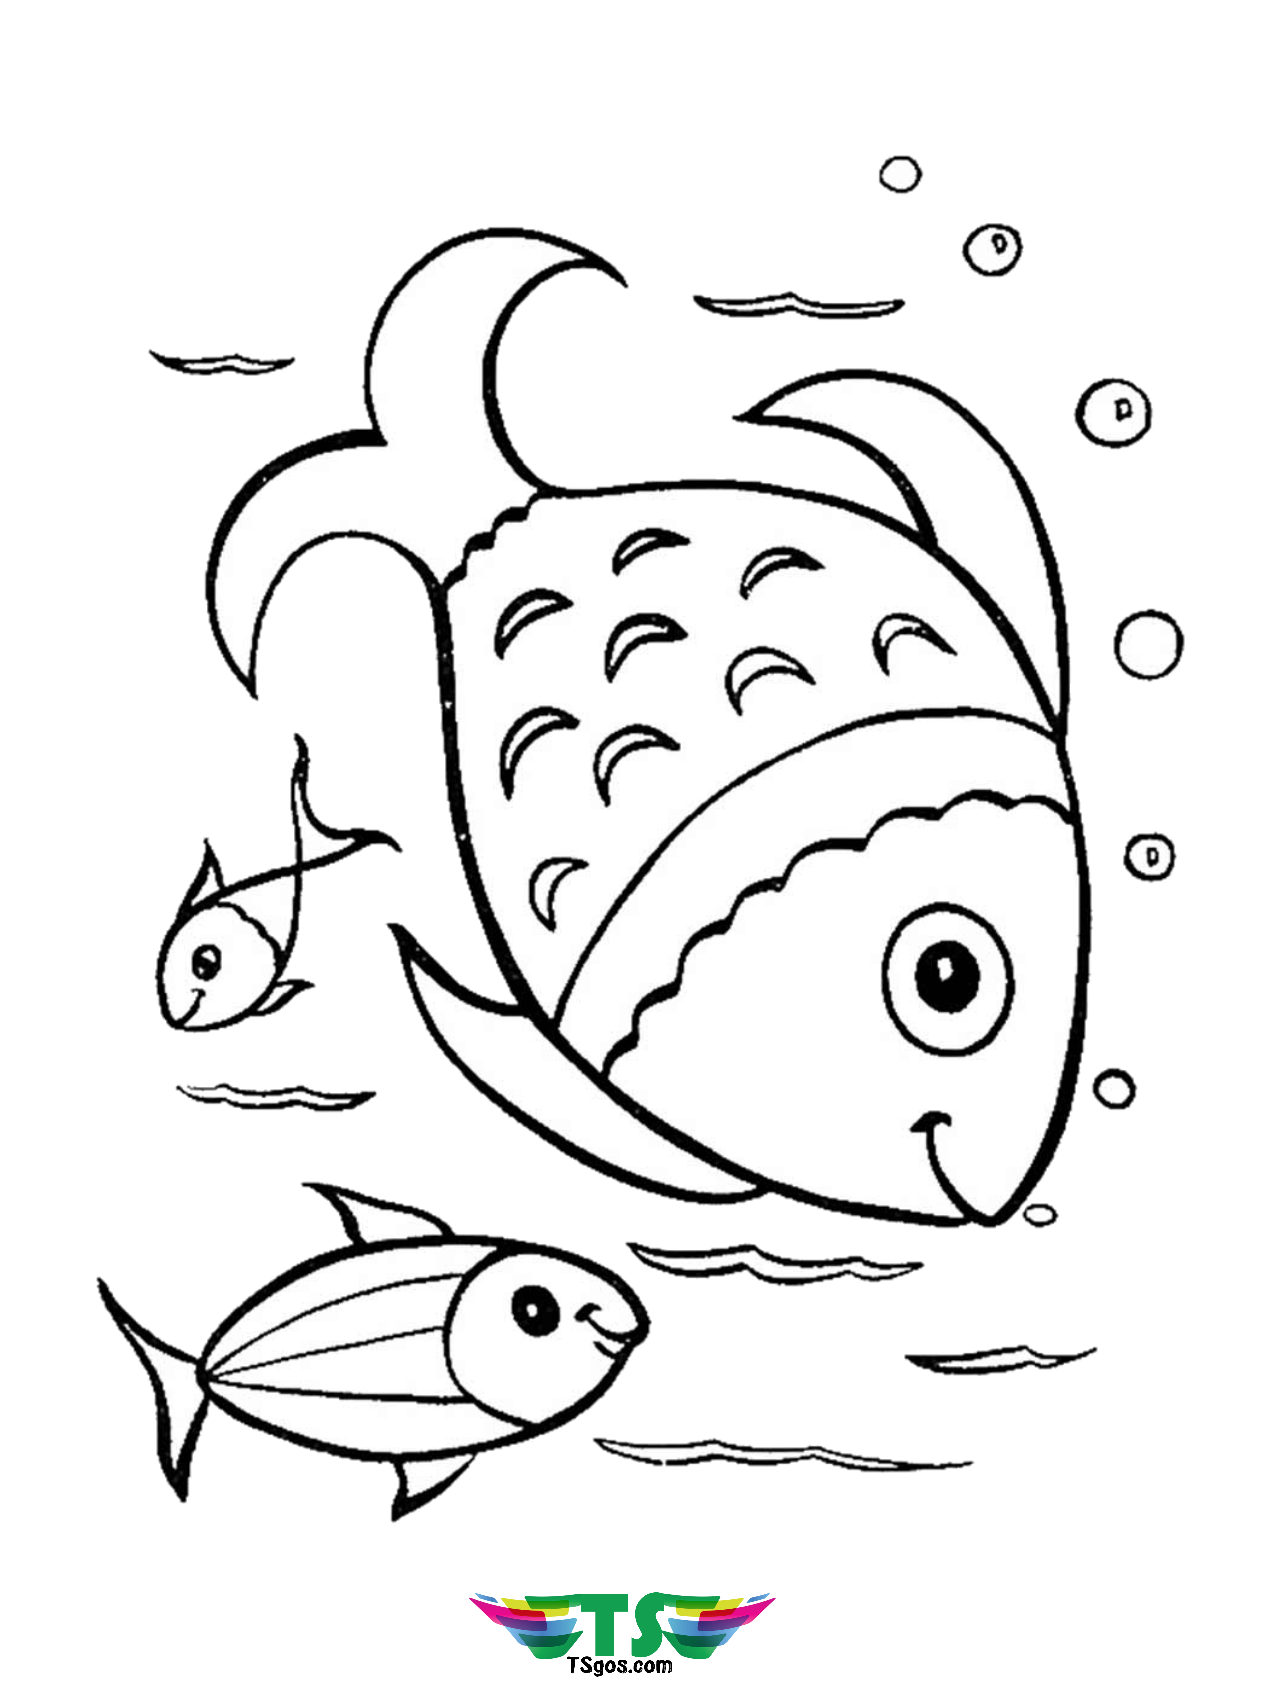 18-fish-coloring-page-pics-coloring-page